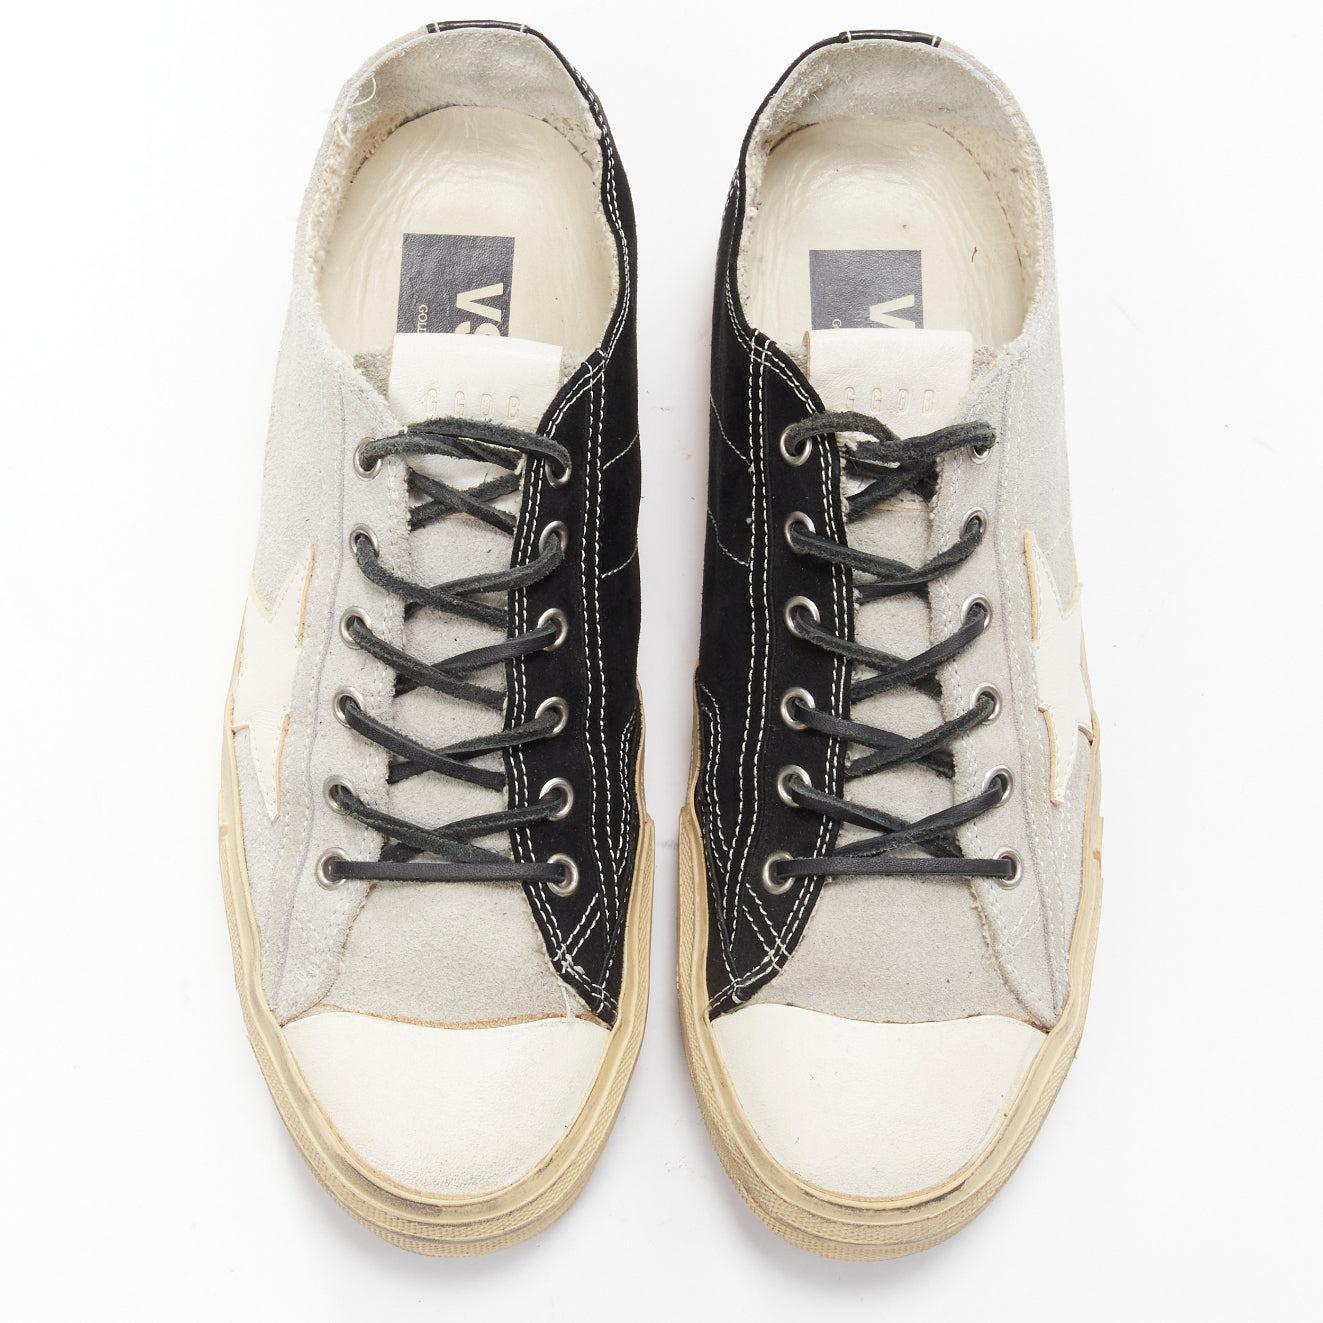 GOLDEN GOOSE VSTAR2 bicolor grey black distressed leather sneakers EU40
Reference: CNLE/A00225
Brand: Golden Goose
Model: VSTAR2
Material: Leather
Color: Grey, Black
Pattern: Solid
Closure: Lace Up
Lining: Cream Leather

CONDITION:
Condition: Very